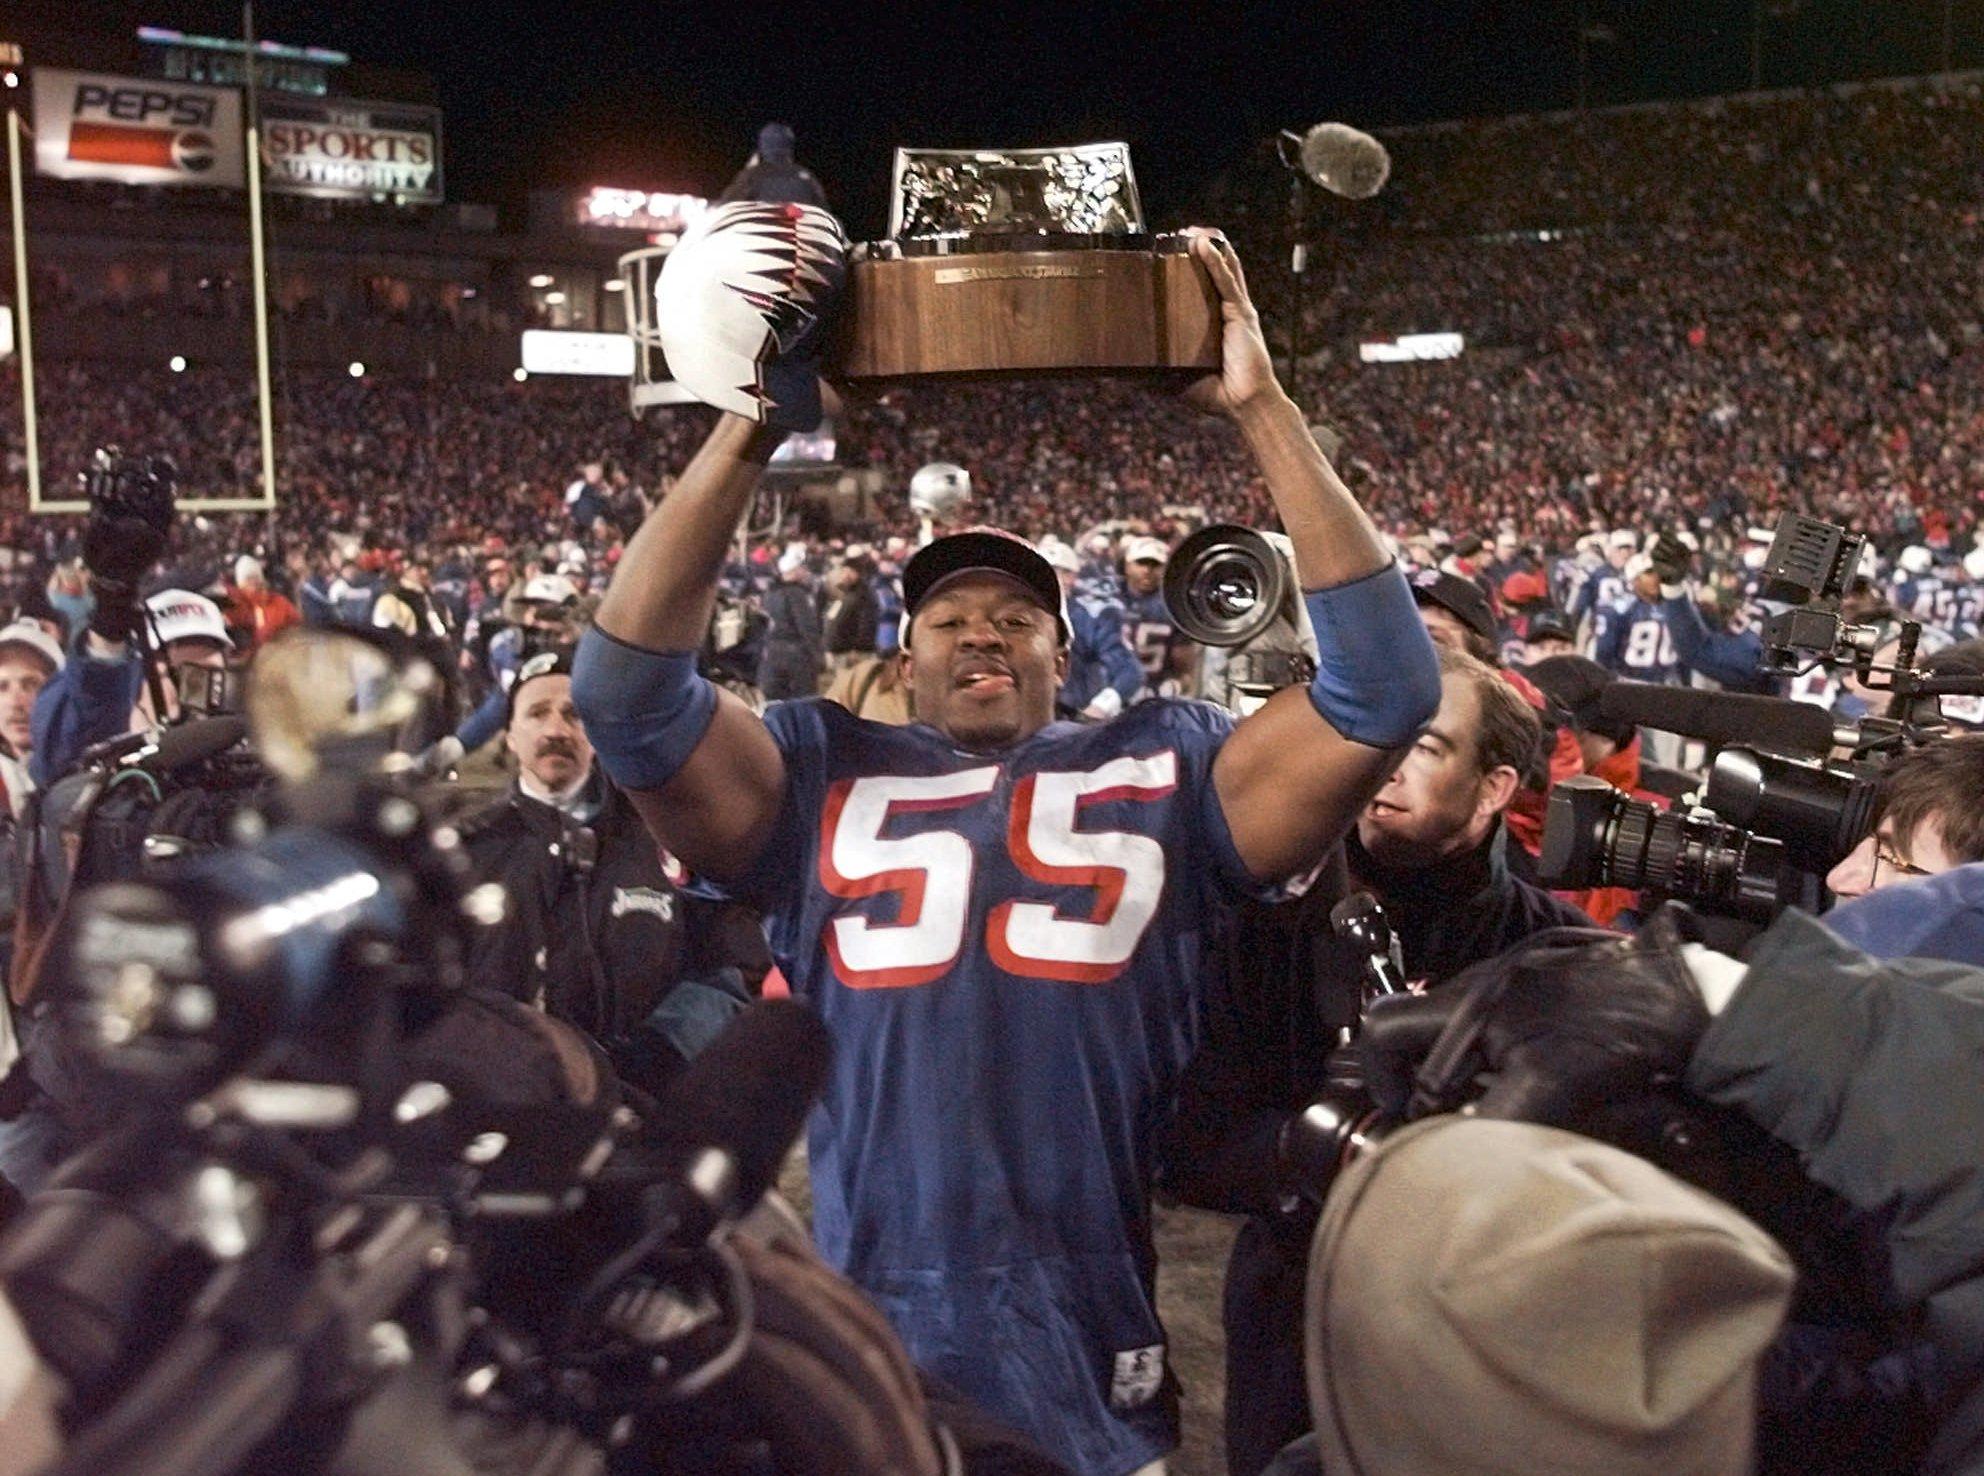 New England Patriots Willie McGinest holds the AFC Championship trophy after the Pats beat the Jacksonville Jaguars 20-6 at Foxboro Stadium in Foxboro, Mass., Sunday, January 12, 1997. (AP Photo/Doug Mills)